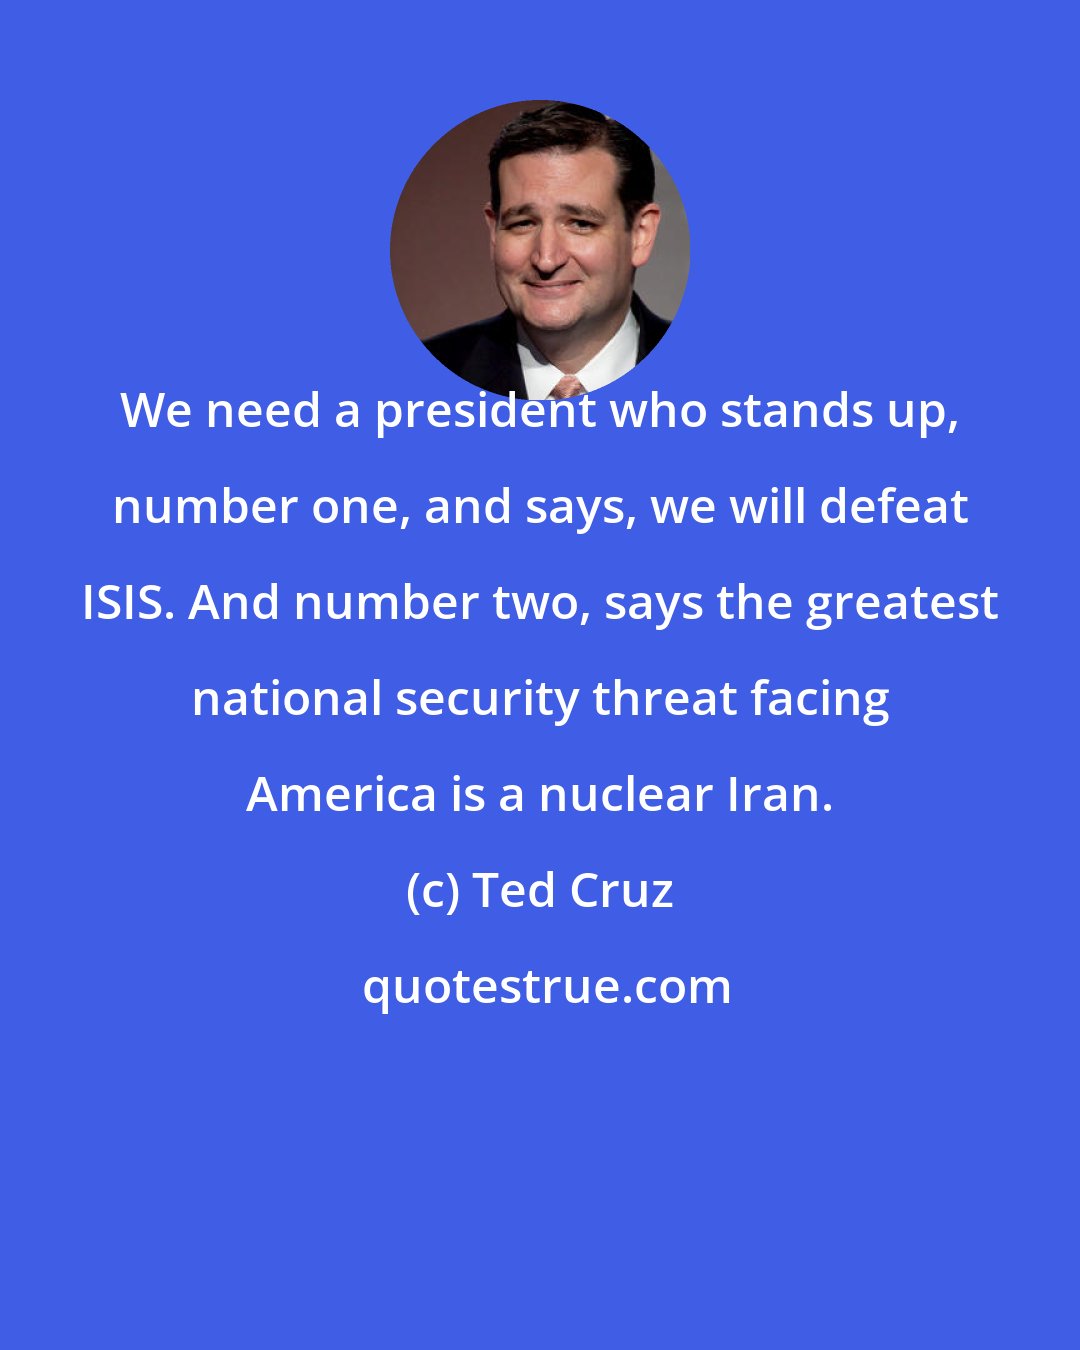 Ted Cruz: We need a president who stands up, number one, and says, we will defeat ISIS. And number two, says the greatest national security threat facing America is a nuclear Iran.